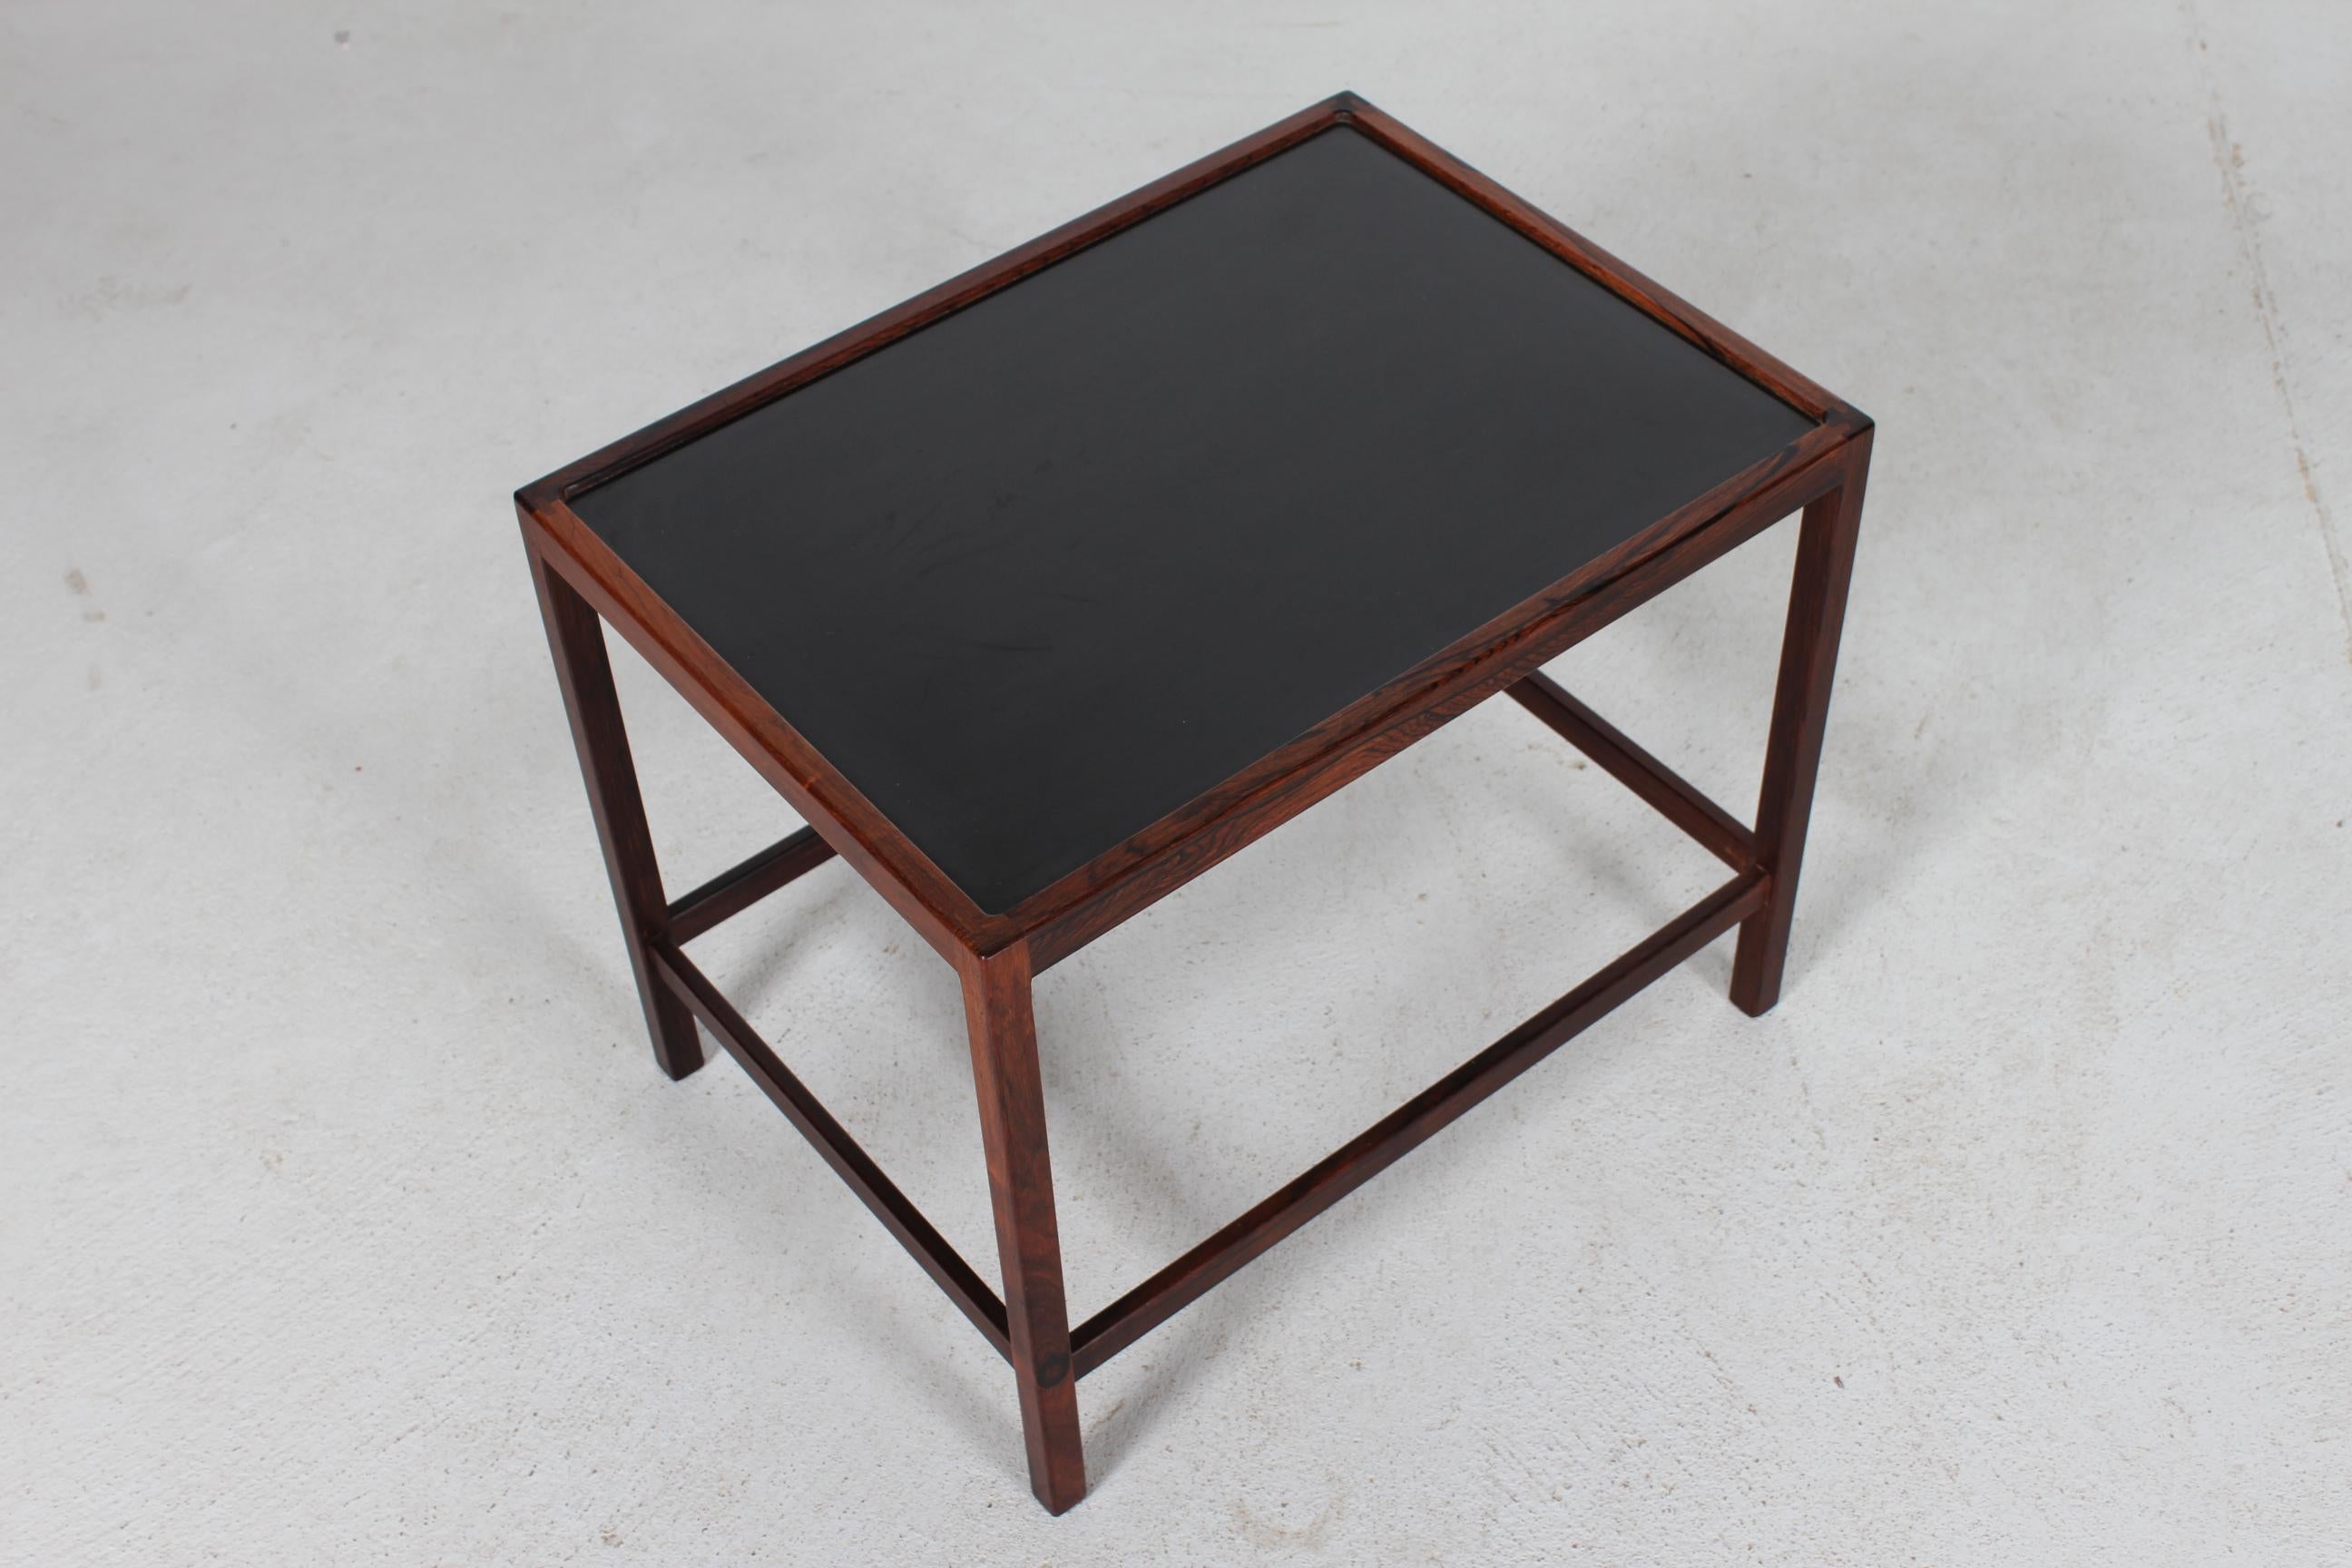 Scandinavian Modern Kurt Østervig Side Table of Rosewood and Black Formica Made in Denmark in 1960s For Sale